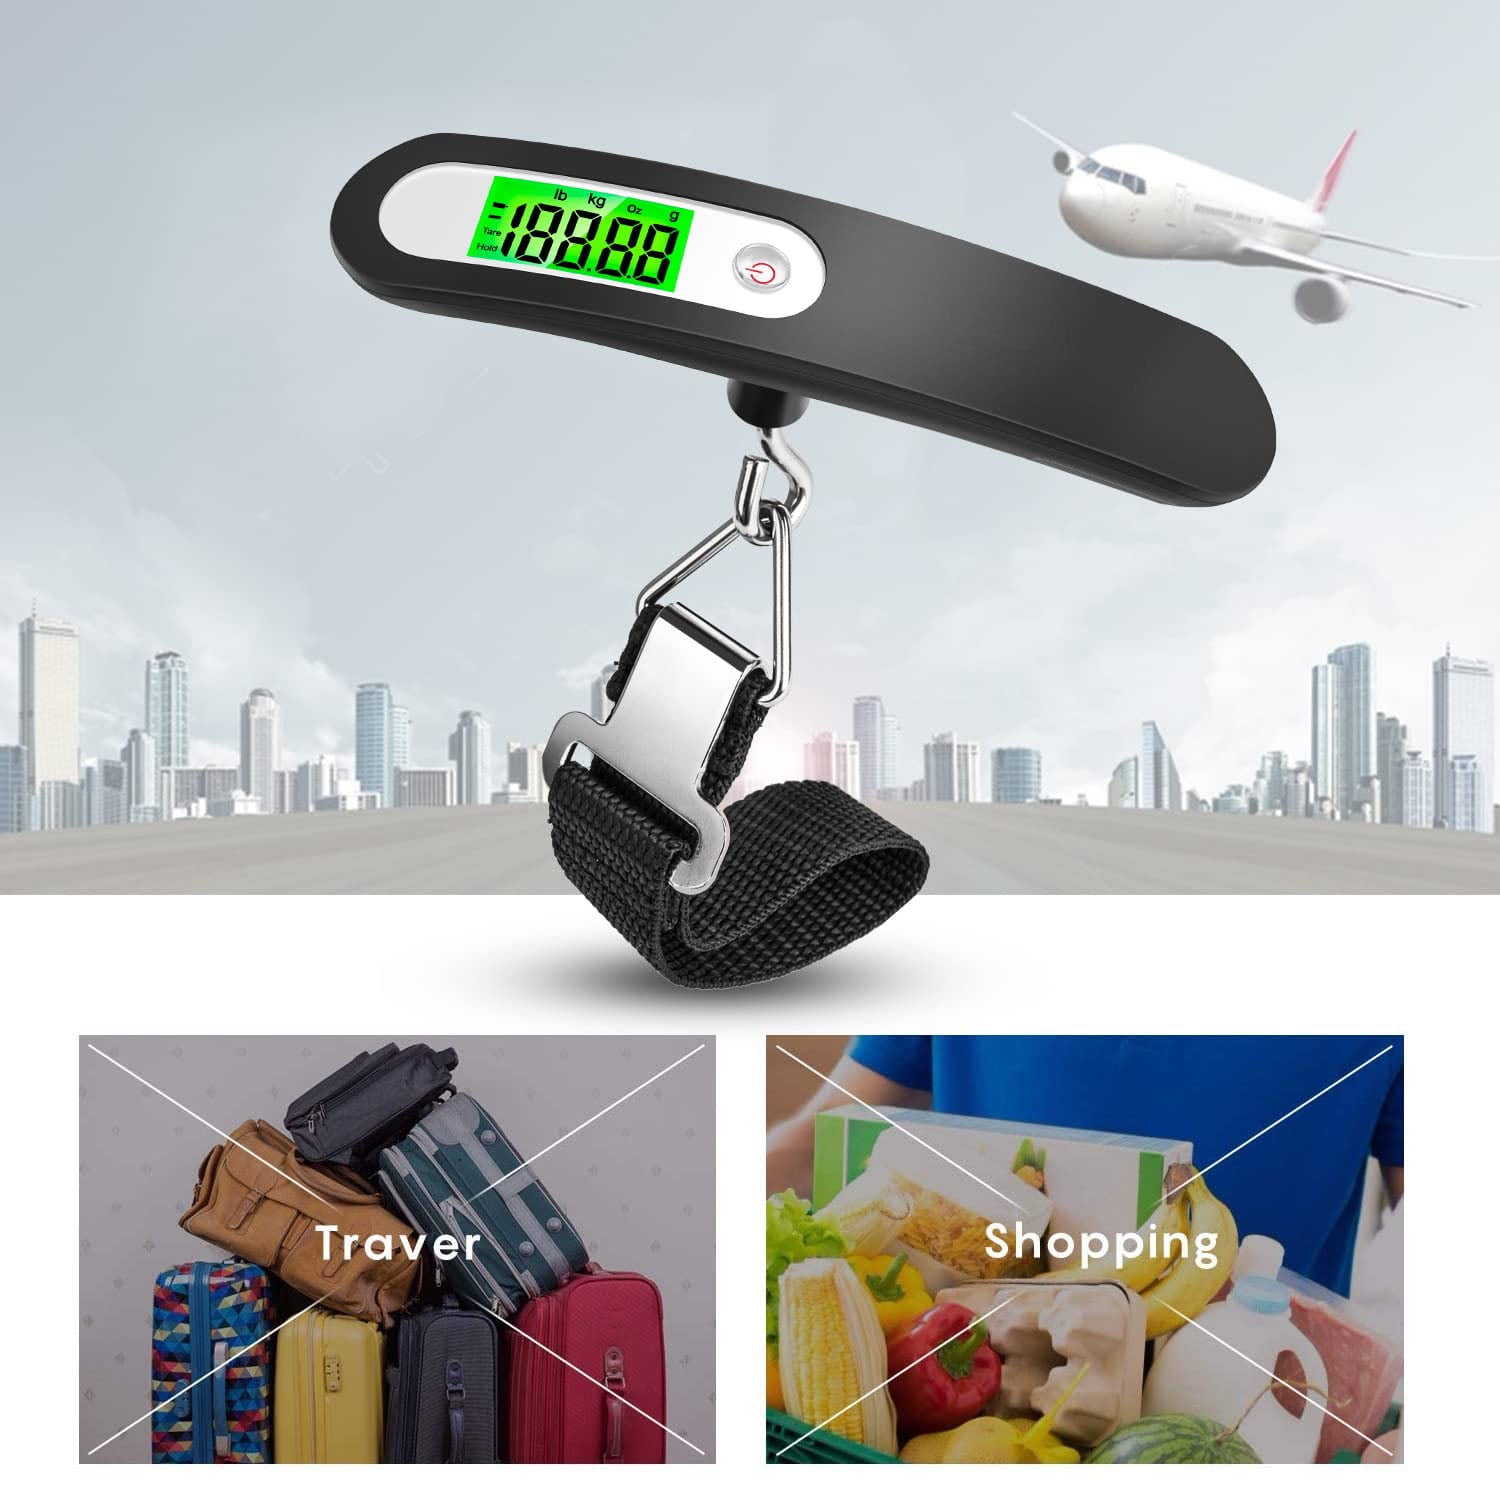  Digital Luggage Scale Gift for Traveler Suitcase Handheld Weight  Scale 110lbs (Black) : Clothing, Shoes & Jewelry